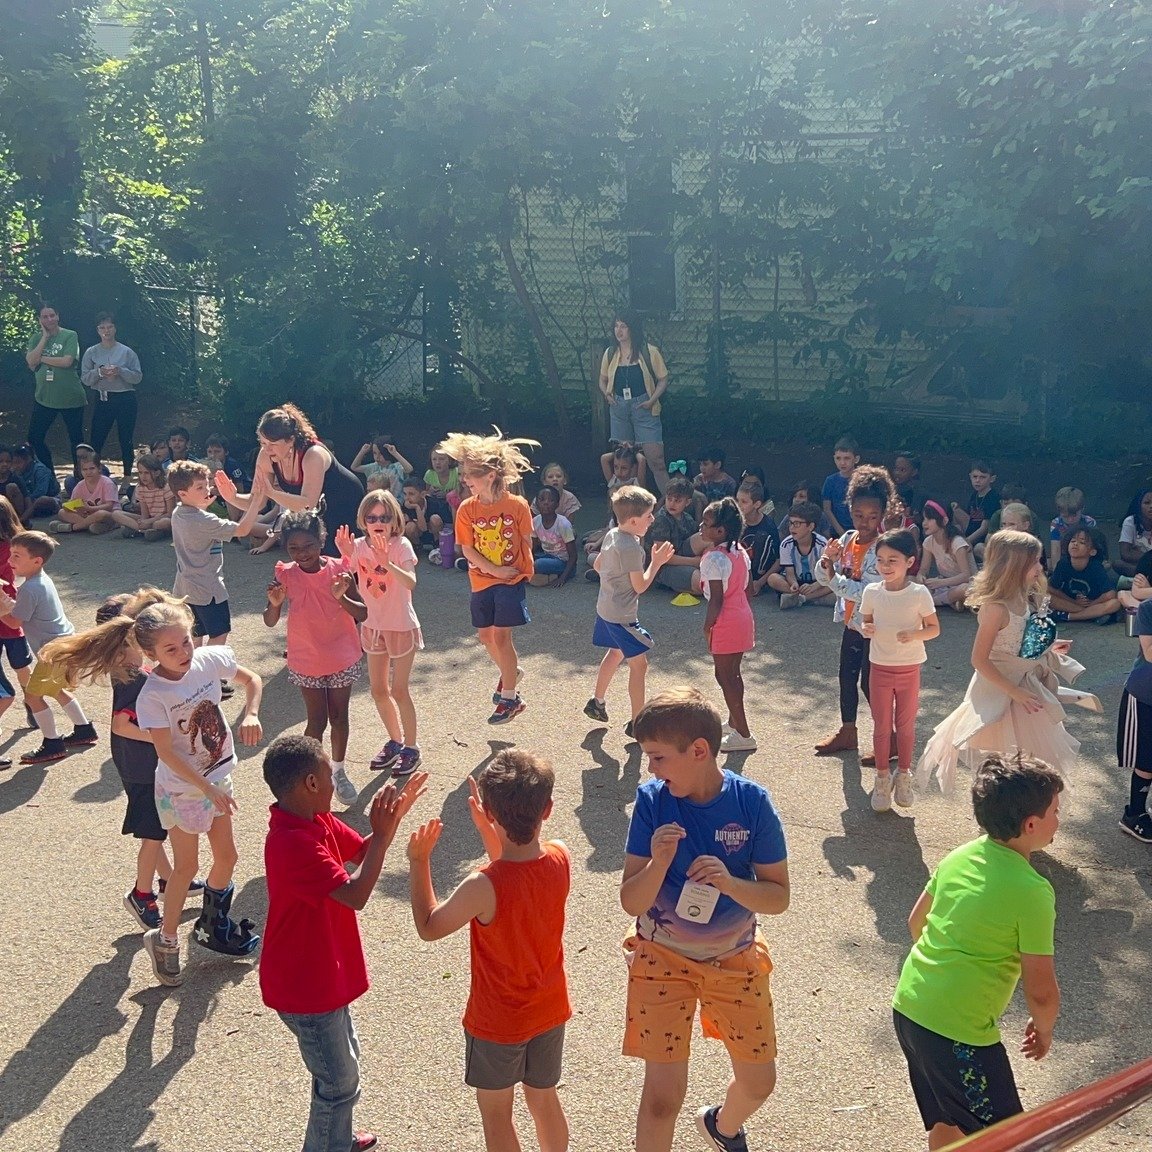 Last Friday, Primary School took their community meeting outside and performed line dances. Check out their moves! #GrowingCitizens